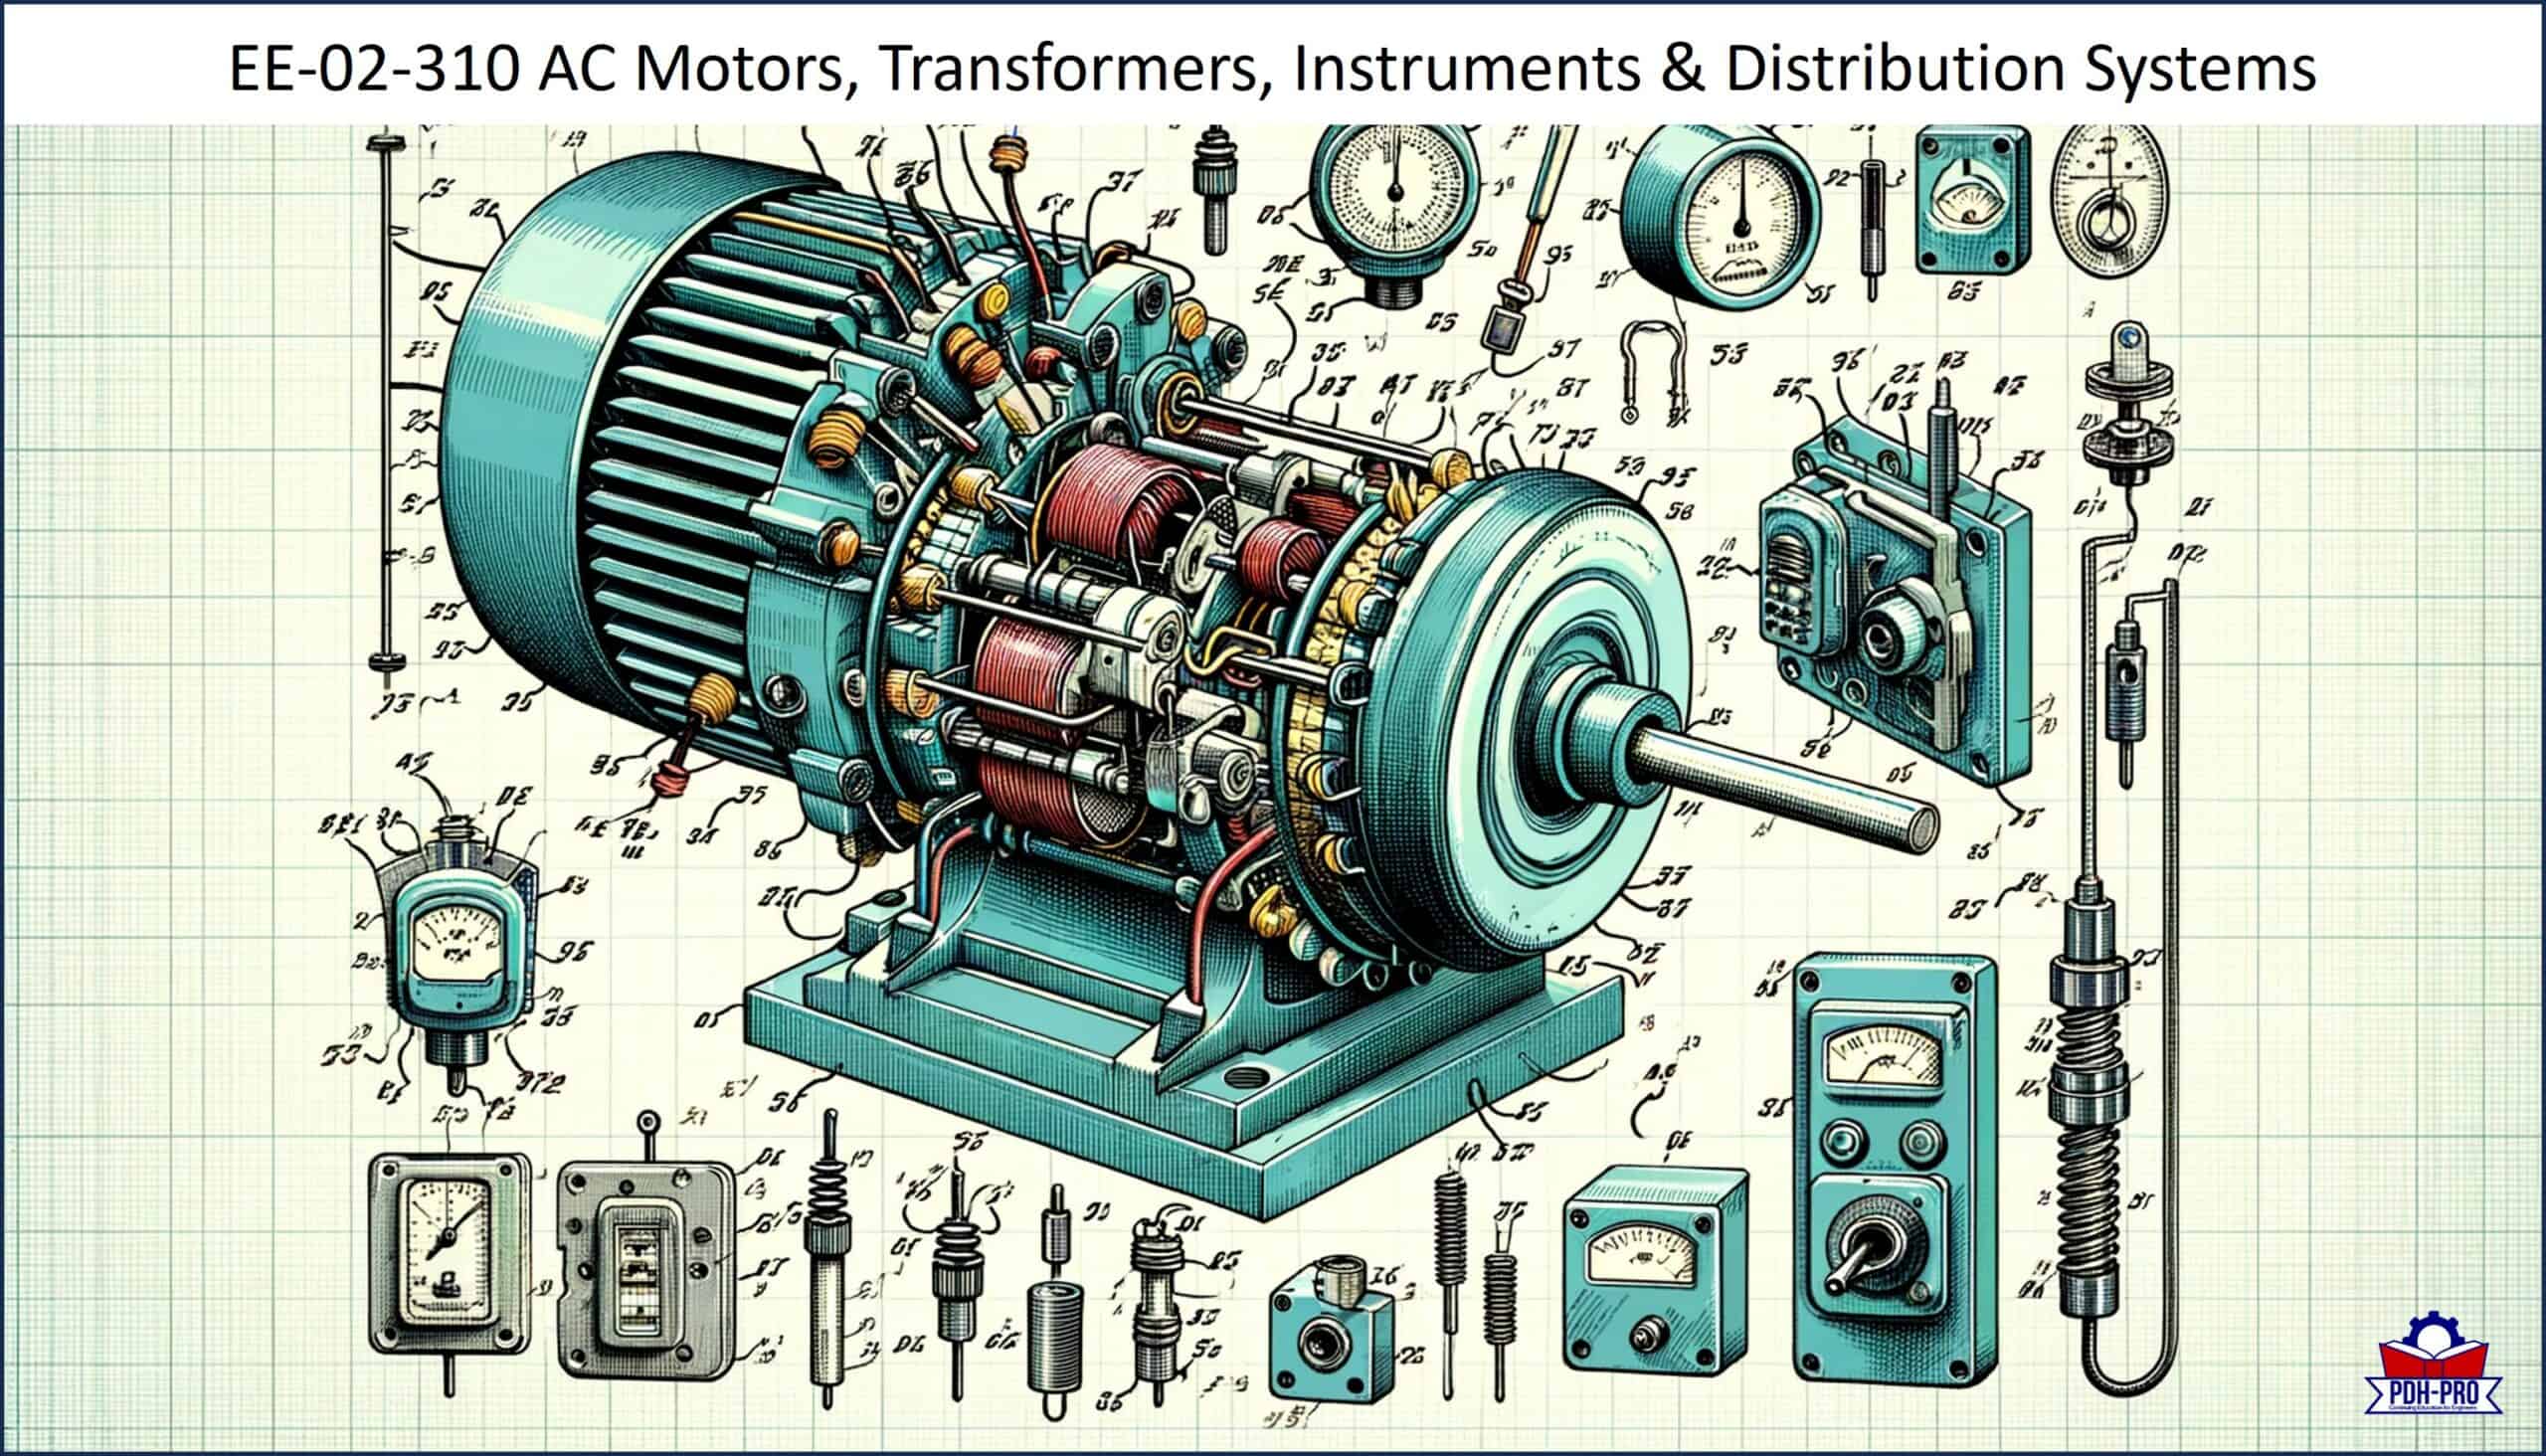 AC Motors, Transformers, Instruments & Distribution Systems